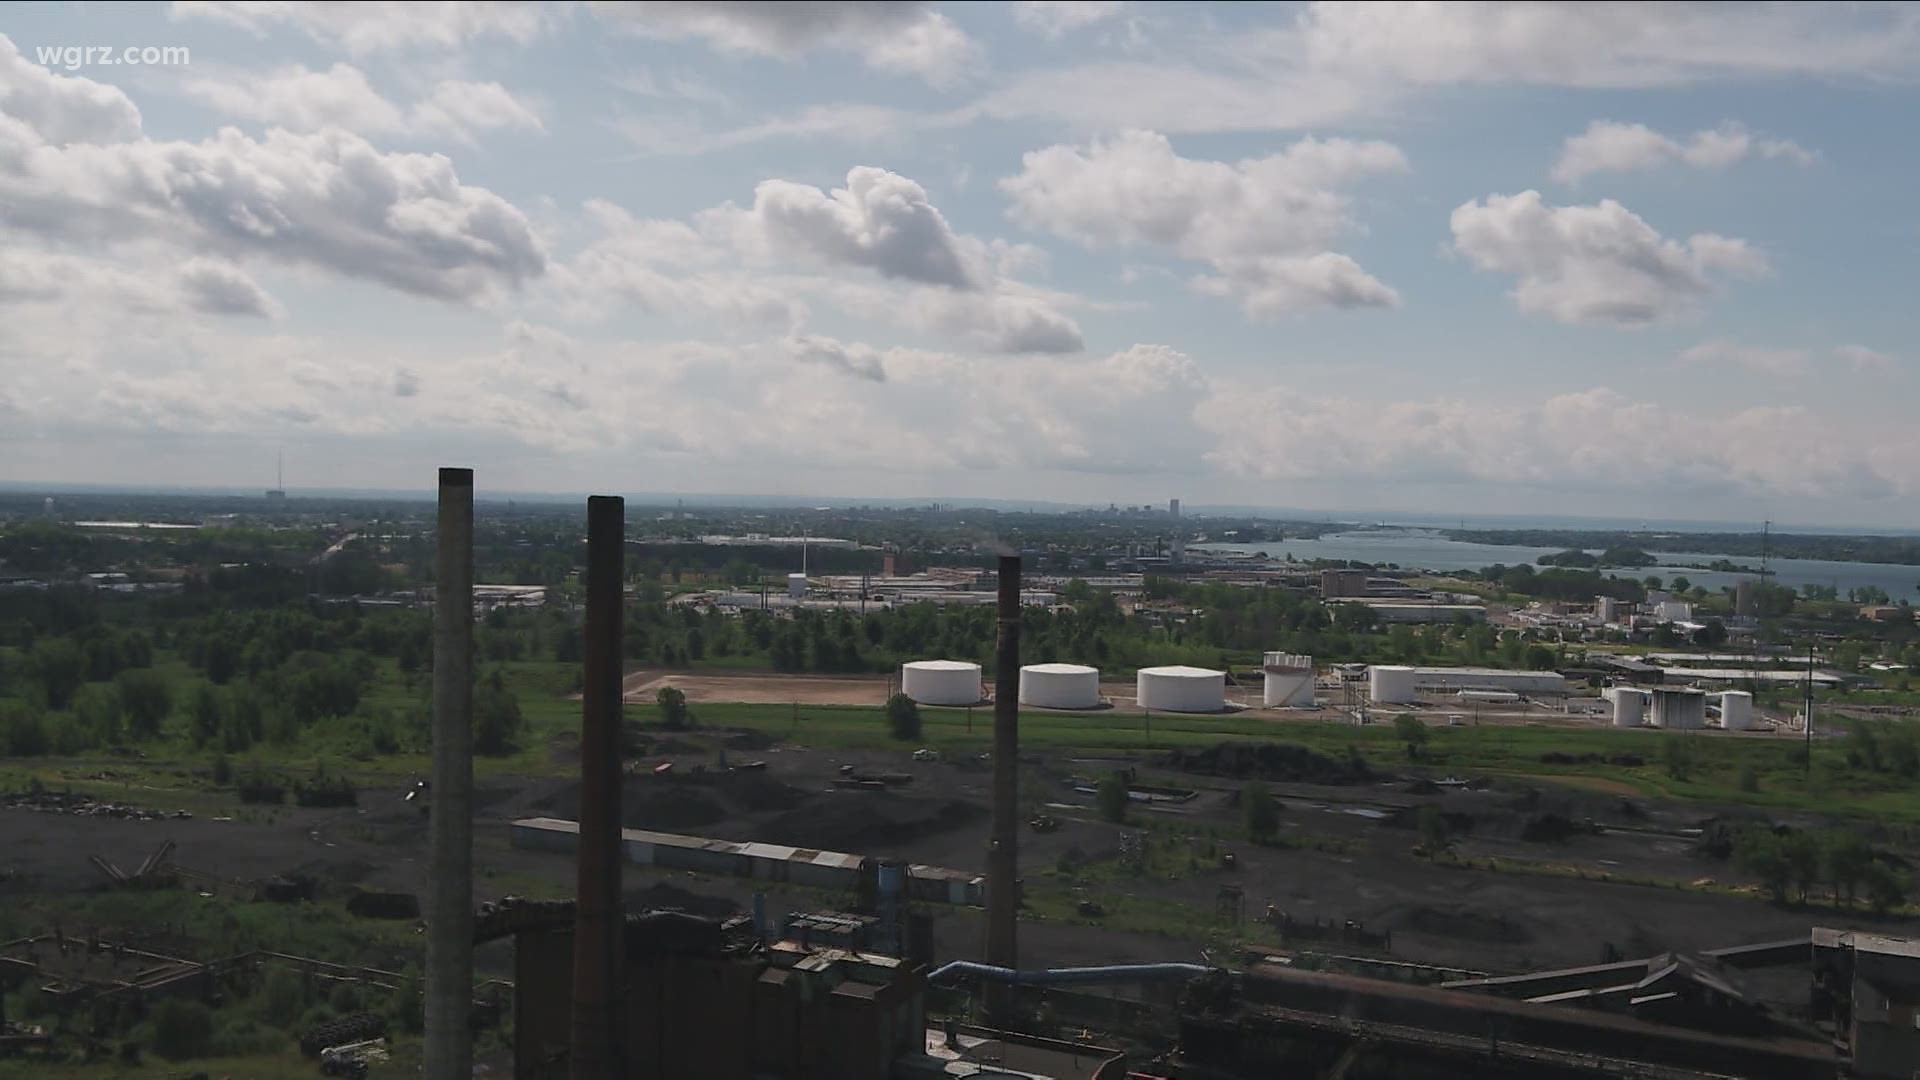 crews are going to use explosives to bring down the 104-year-old smokestacks at the closed plant.